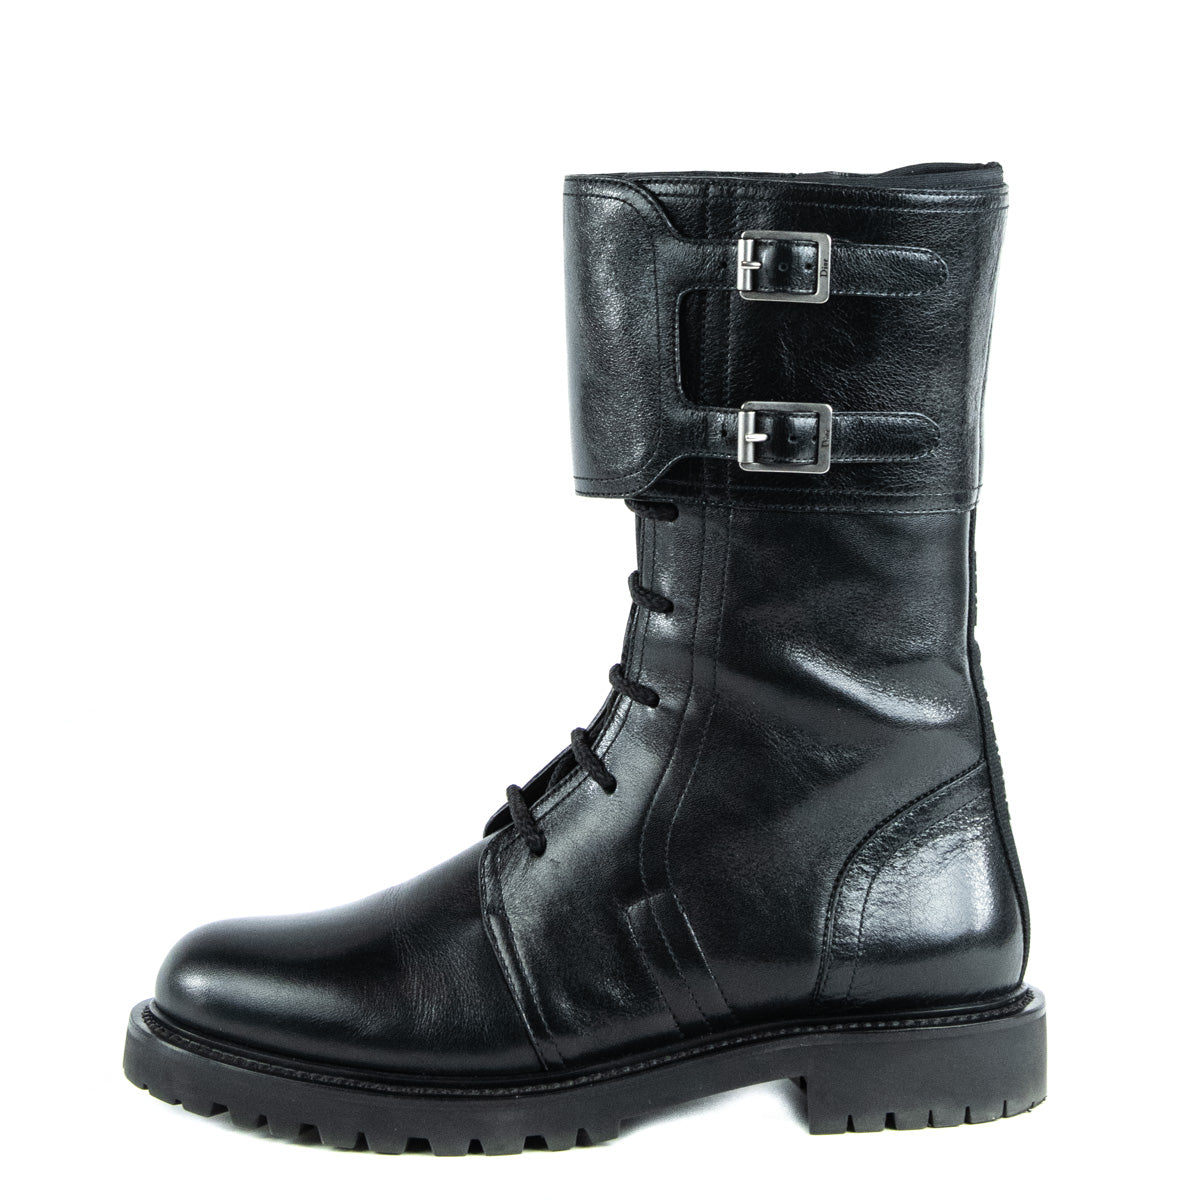 Dior Black Leather Combat Boots Size US 9 | EU 39 - Love that Bag etc - Preowned Authentic Designer Handbags & Preloved Fashions